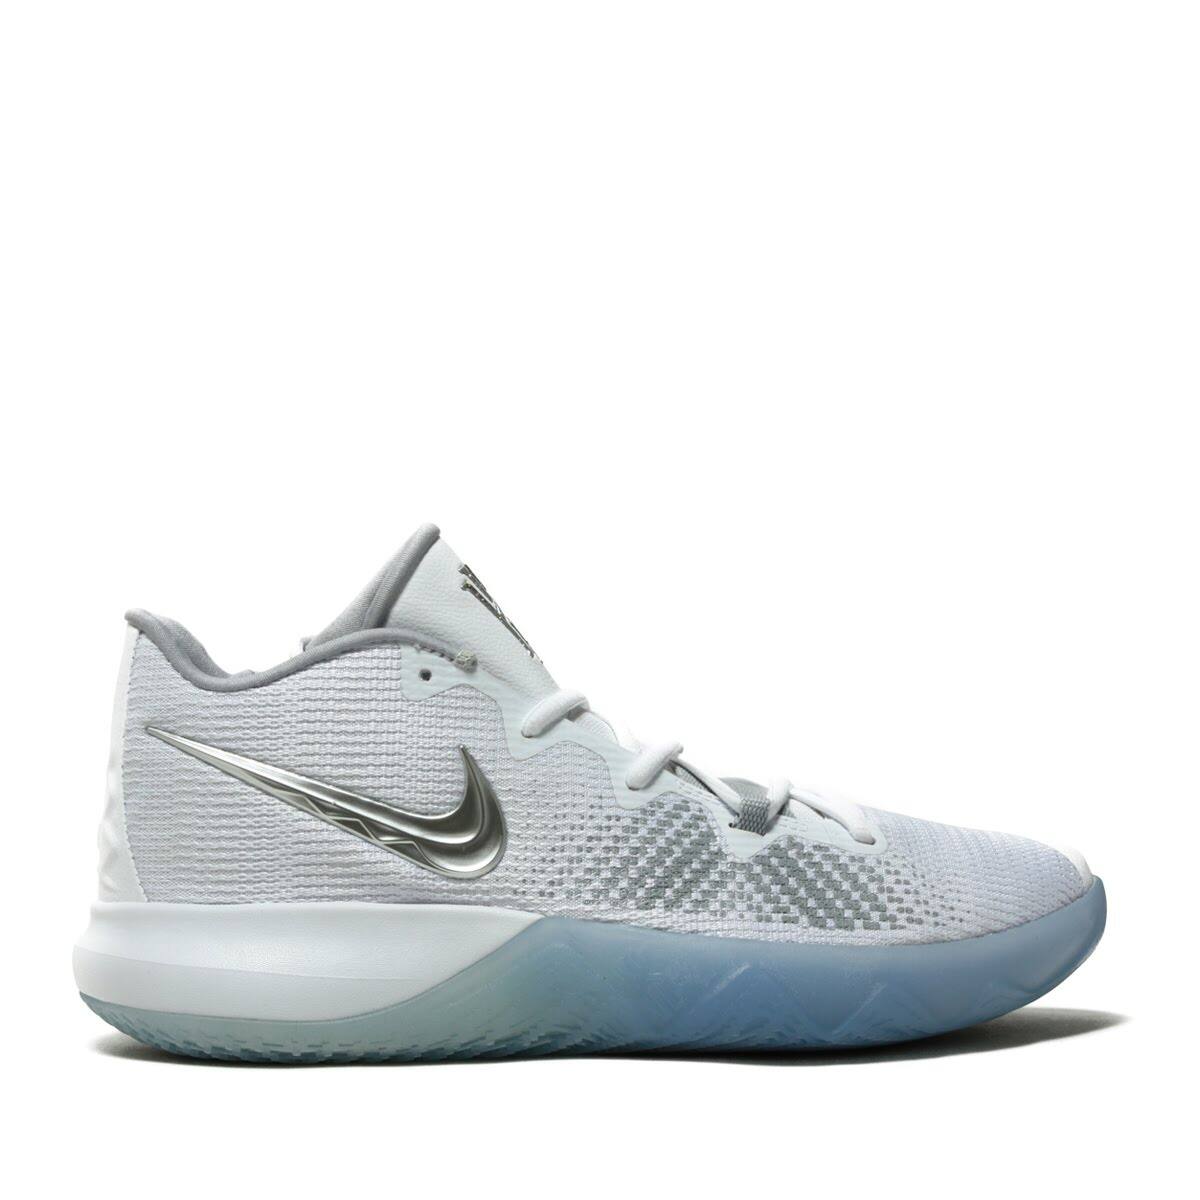 kyrie flytrap white and silver